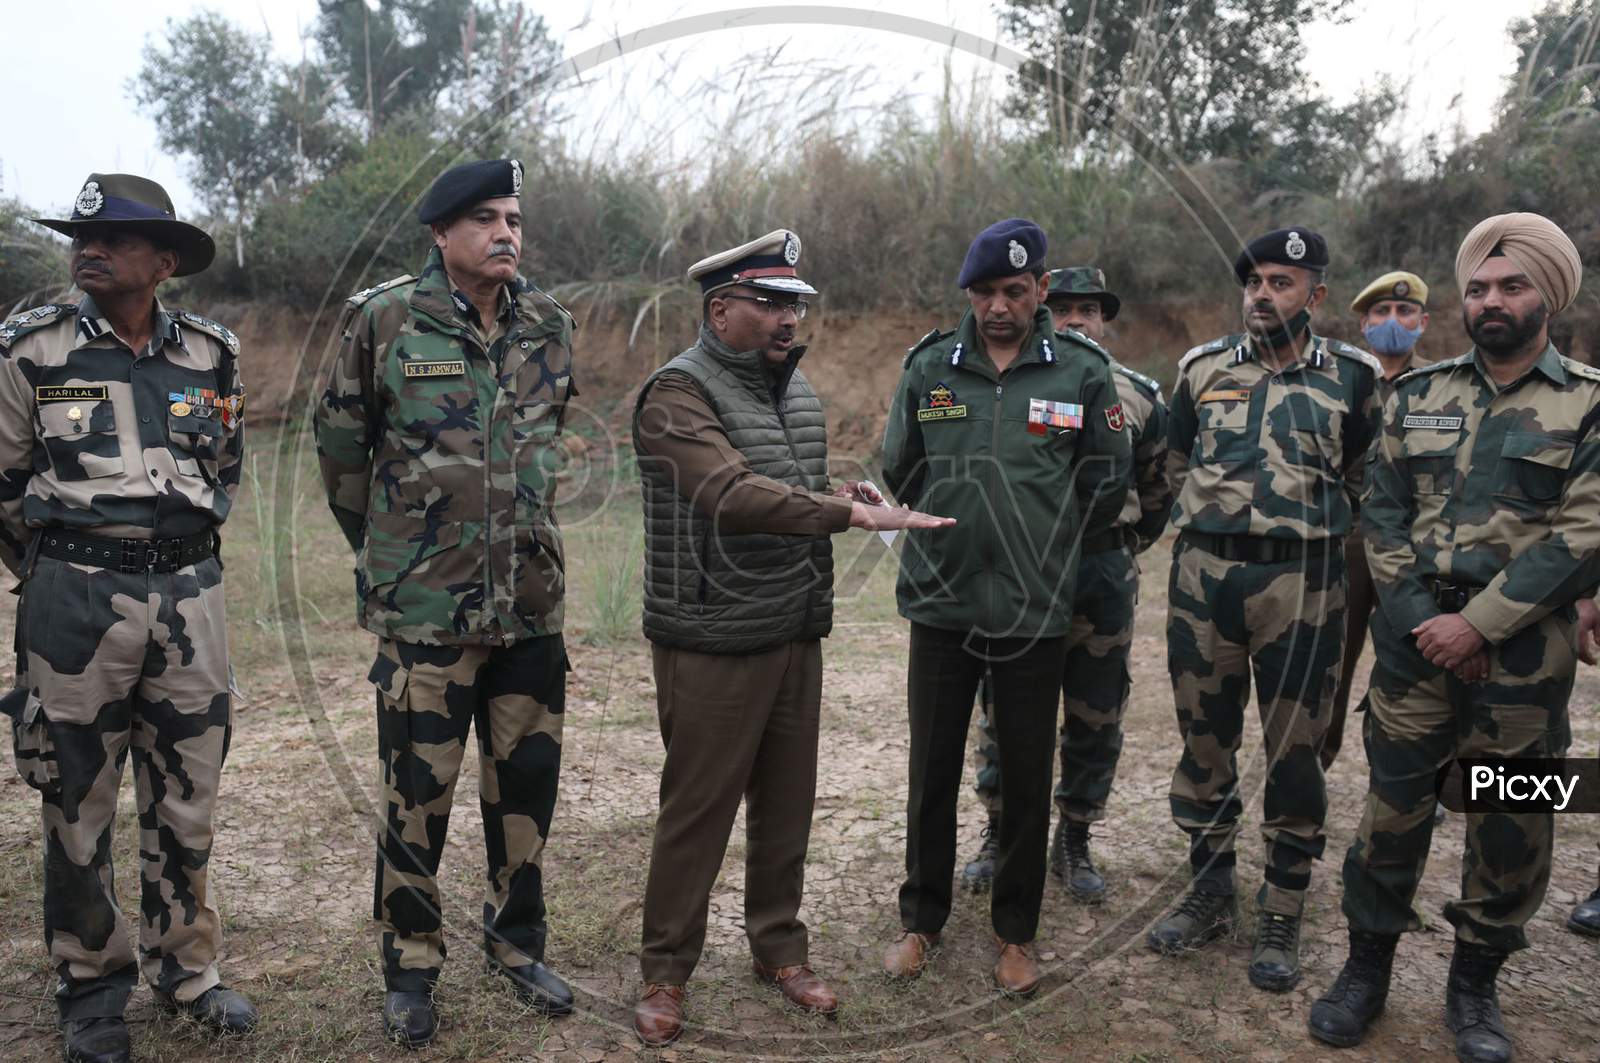 Police officers and Bsf inquire an underground tunnel near the international border in Samba sector, suspected to have been used by terrorists killed in a recent encounter in Nagrota, in Jammu district, Sunday, Nov. 22, 2020.